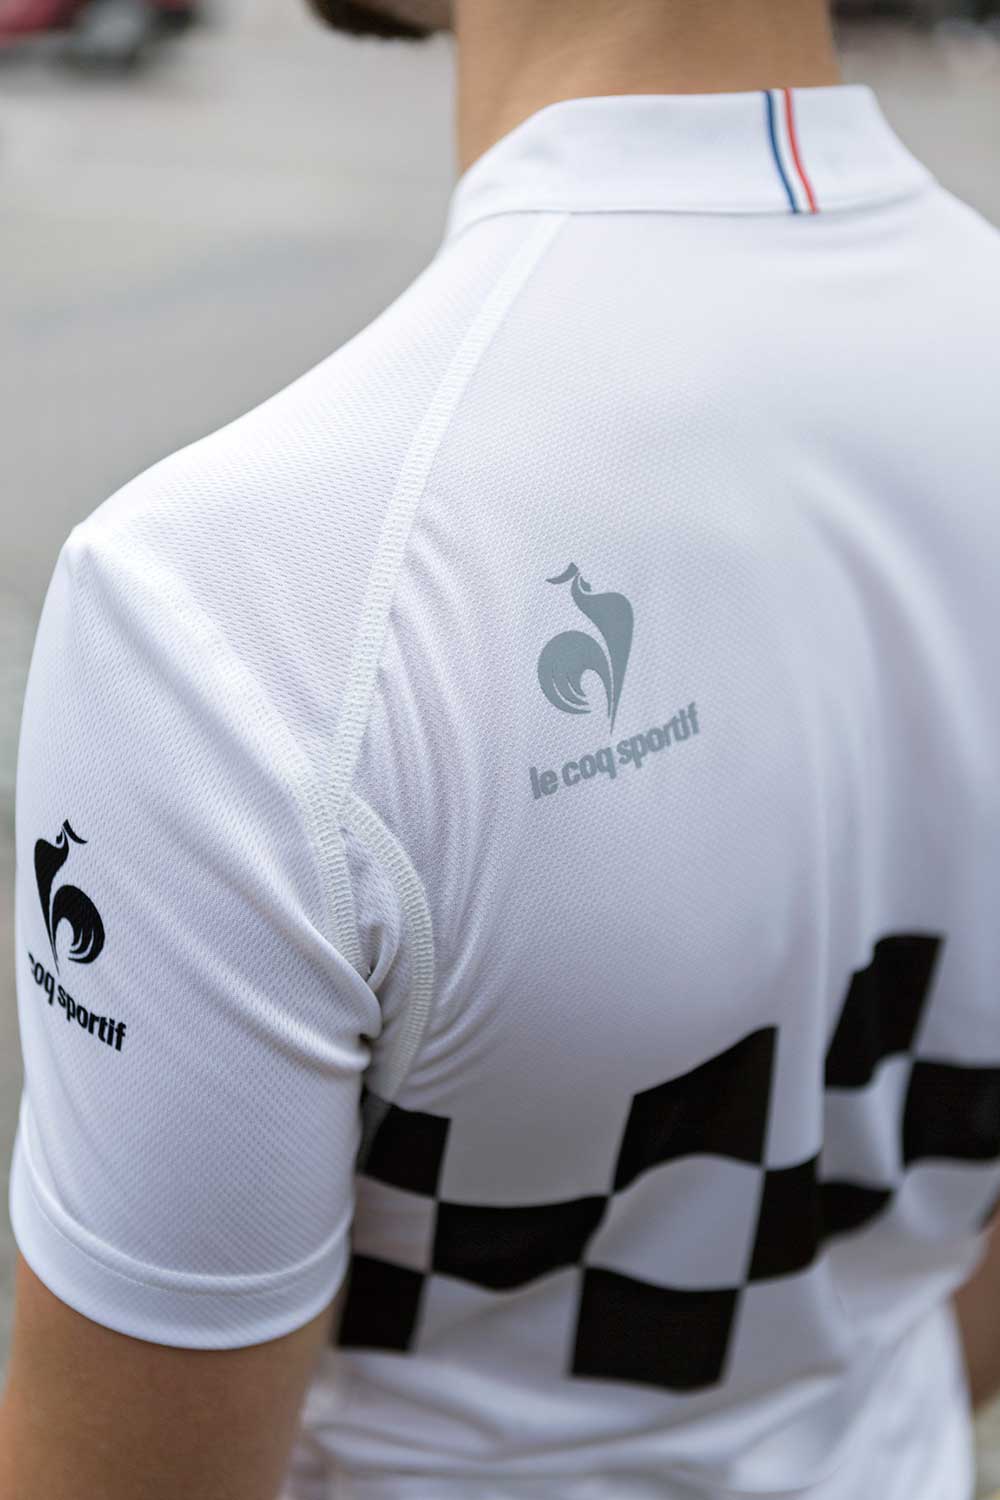 le-coq-sportif-cycling-performance-day-x-night-image-6